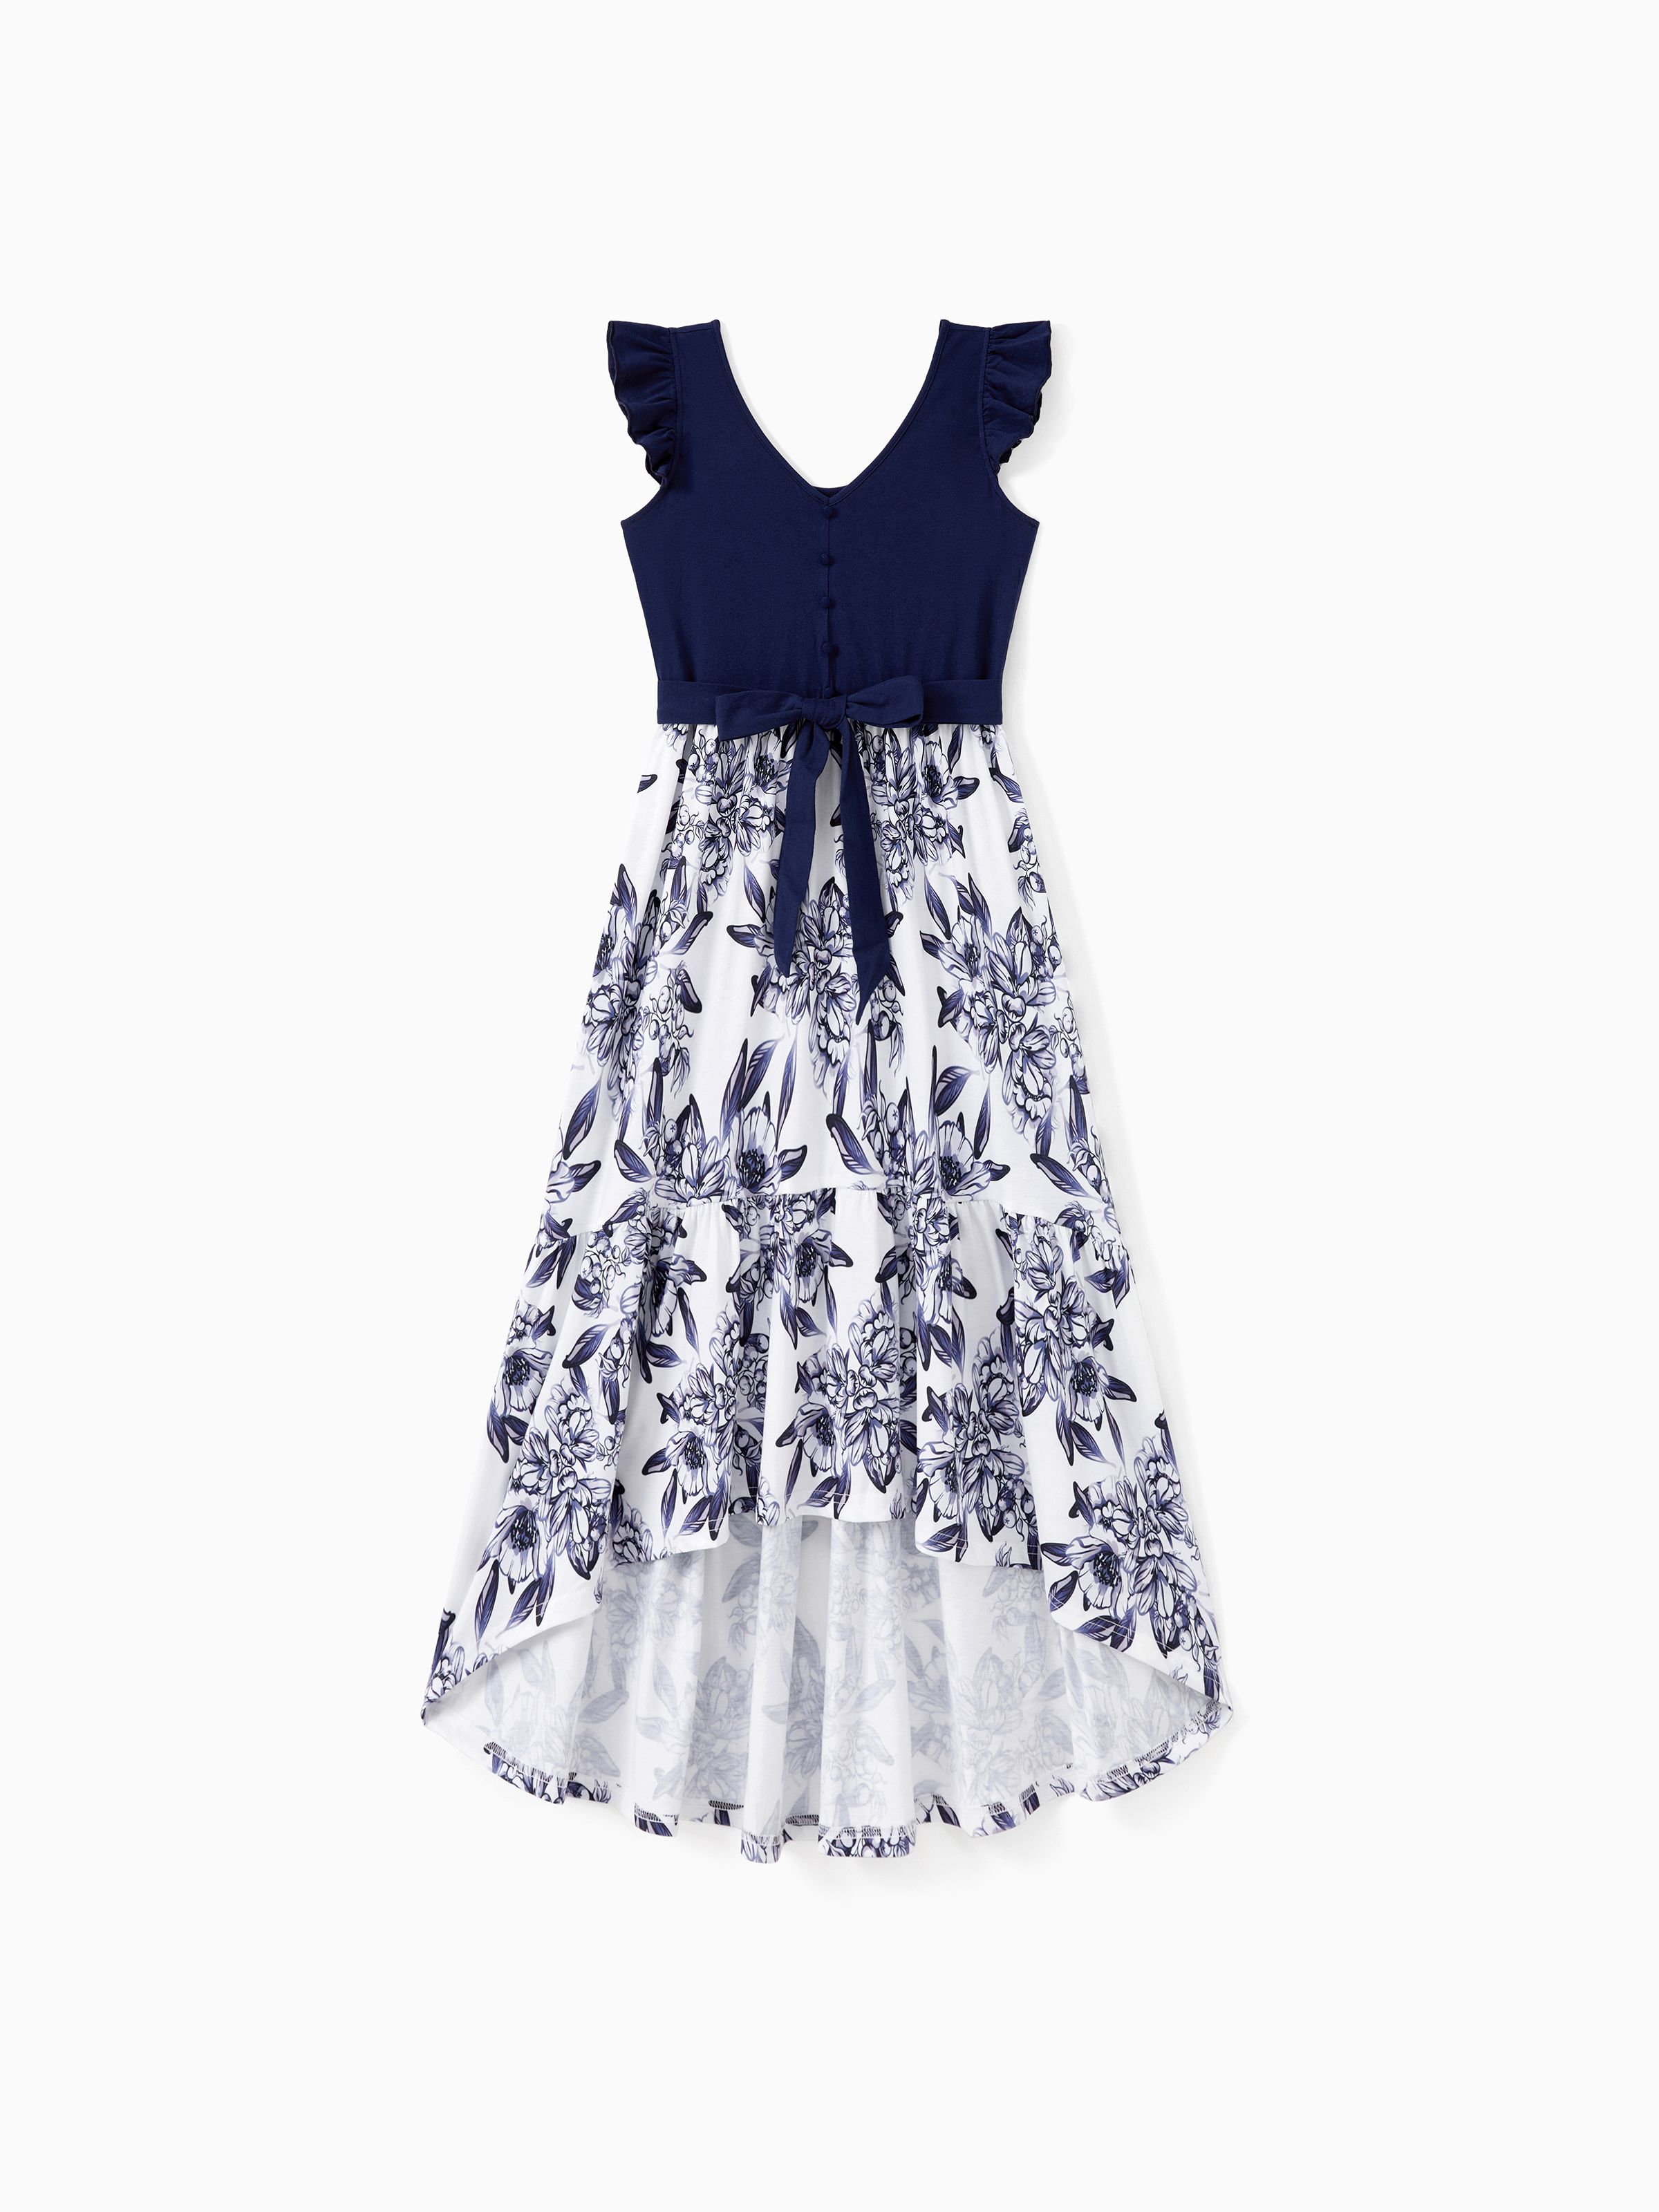 

Family Matching Sets Color Block Tee or Faux Button Navy Blue Top Spliced Floral High-Low Ruffle Hemline Dress